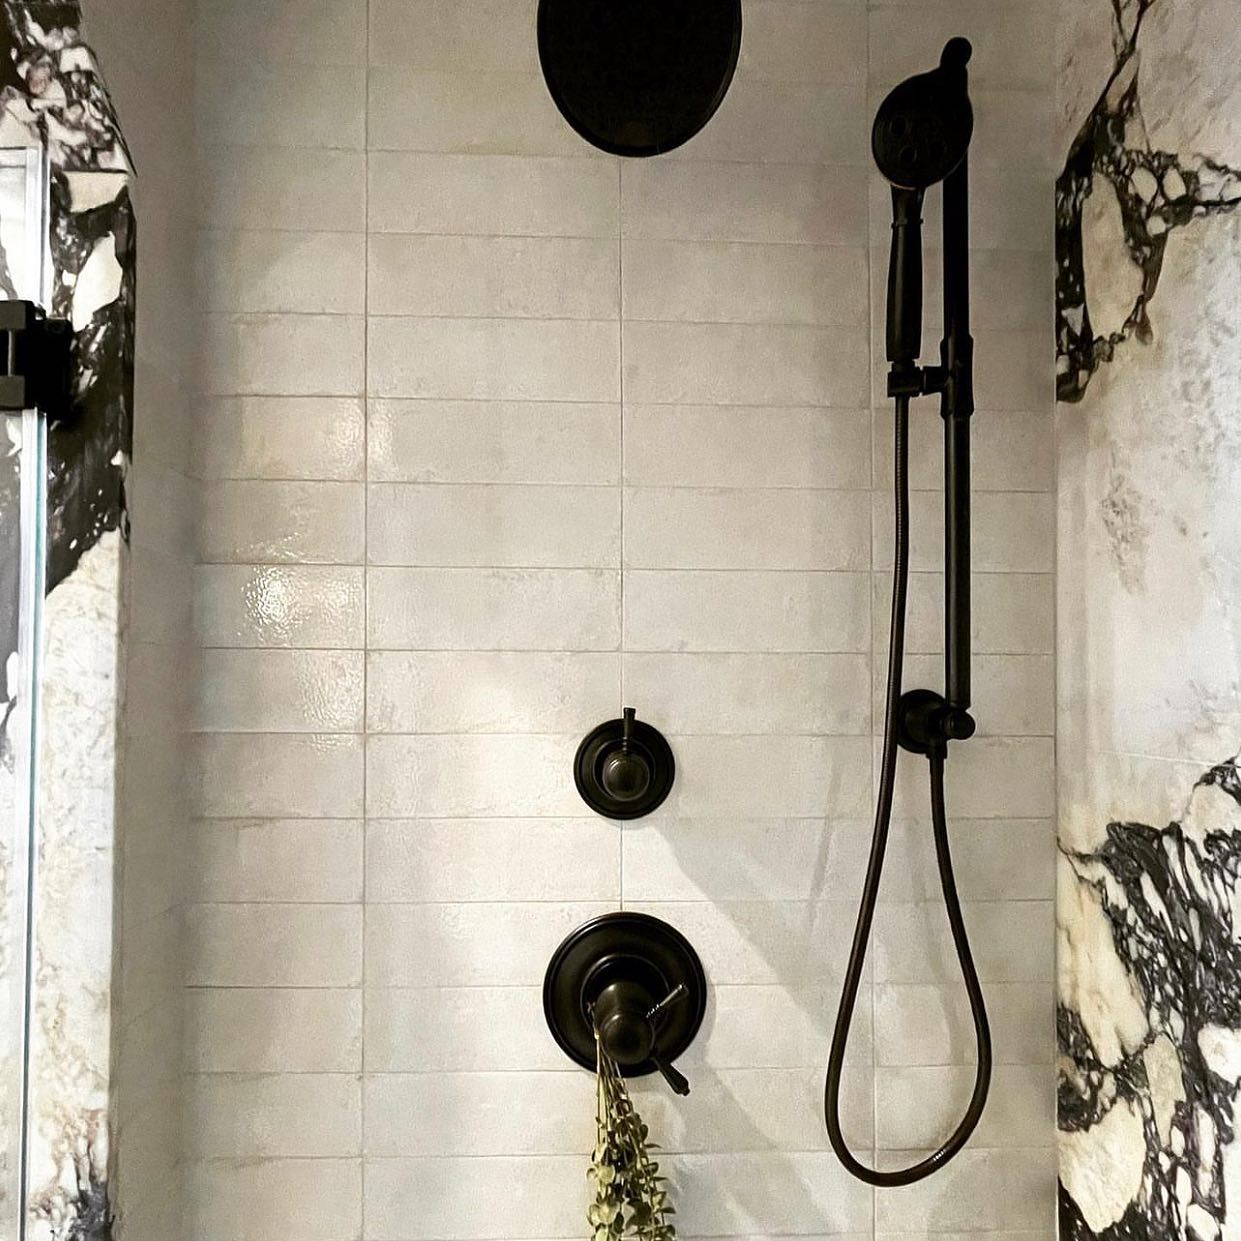 Stunning shower design by @aspenjamesdesign ft. our Inhale collection in Blanco 4”x12” 
#emsertile